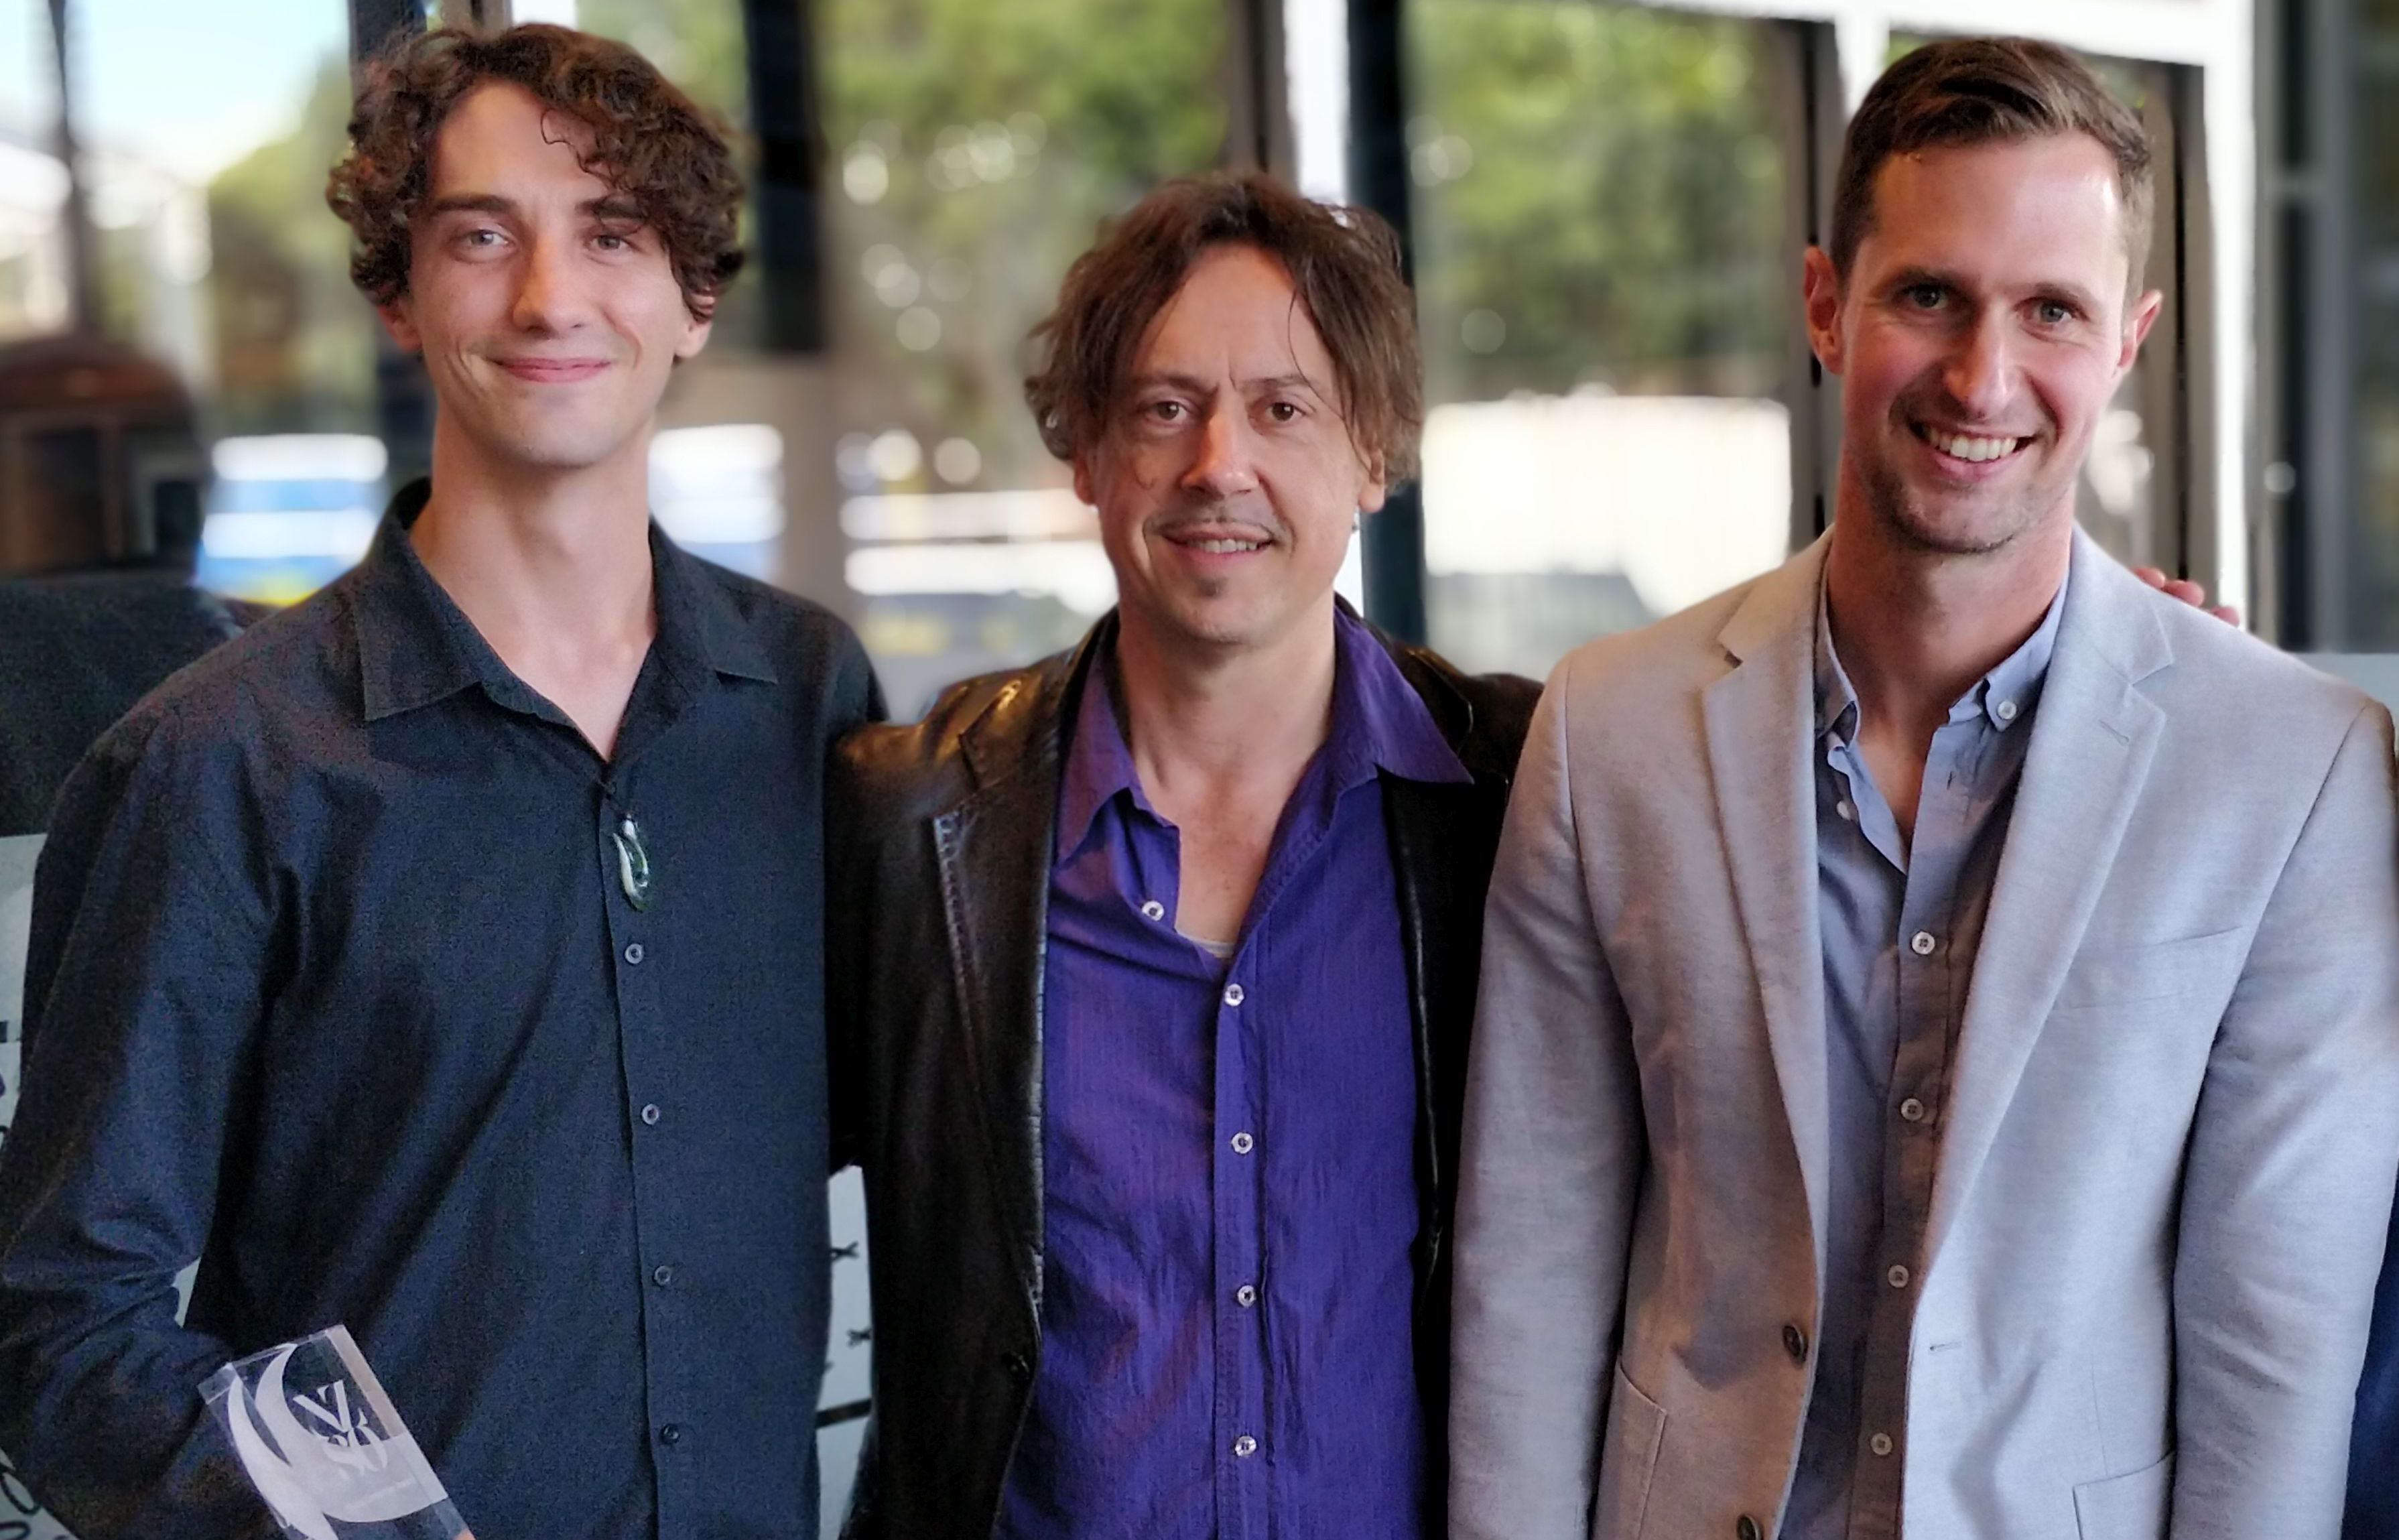 2018 Todd Young Composer winner Luka Venter with Hamish McKeich and Chris Gendall